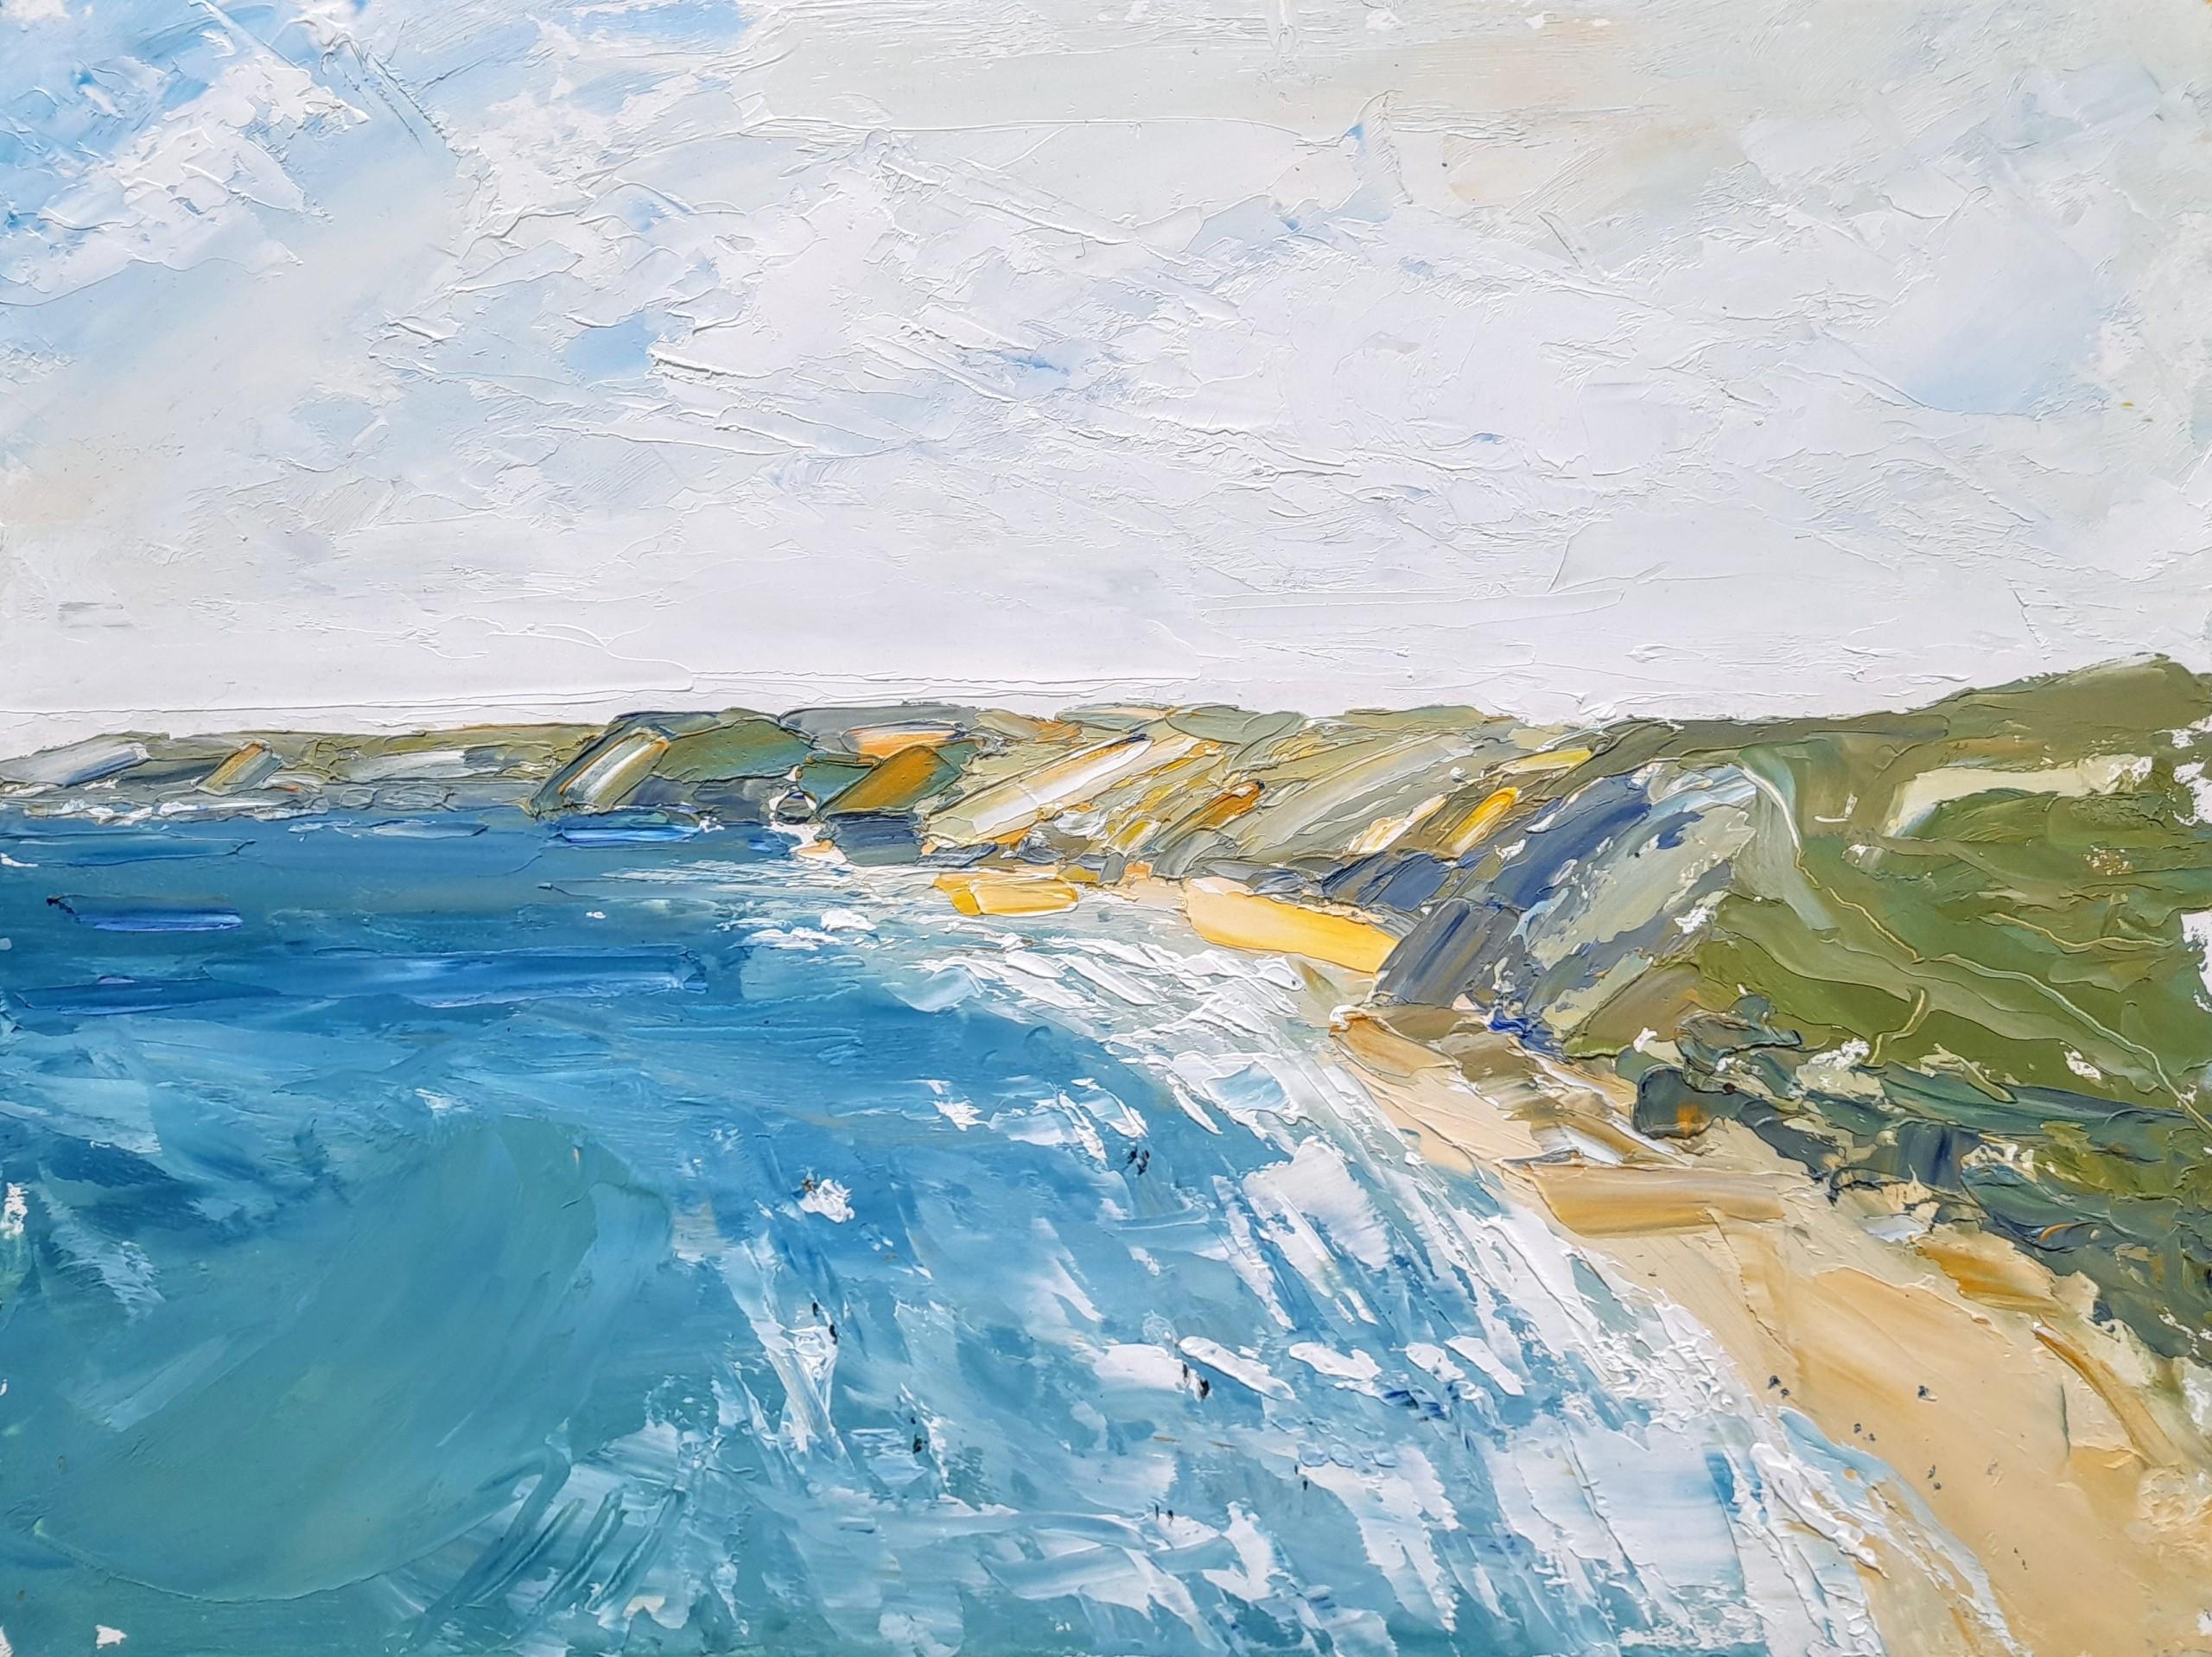 Georgie Dowling  Landscape Painting - A Breezy Day at Perranporth, Cornwall by Georgie Dowling, Coastal Art